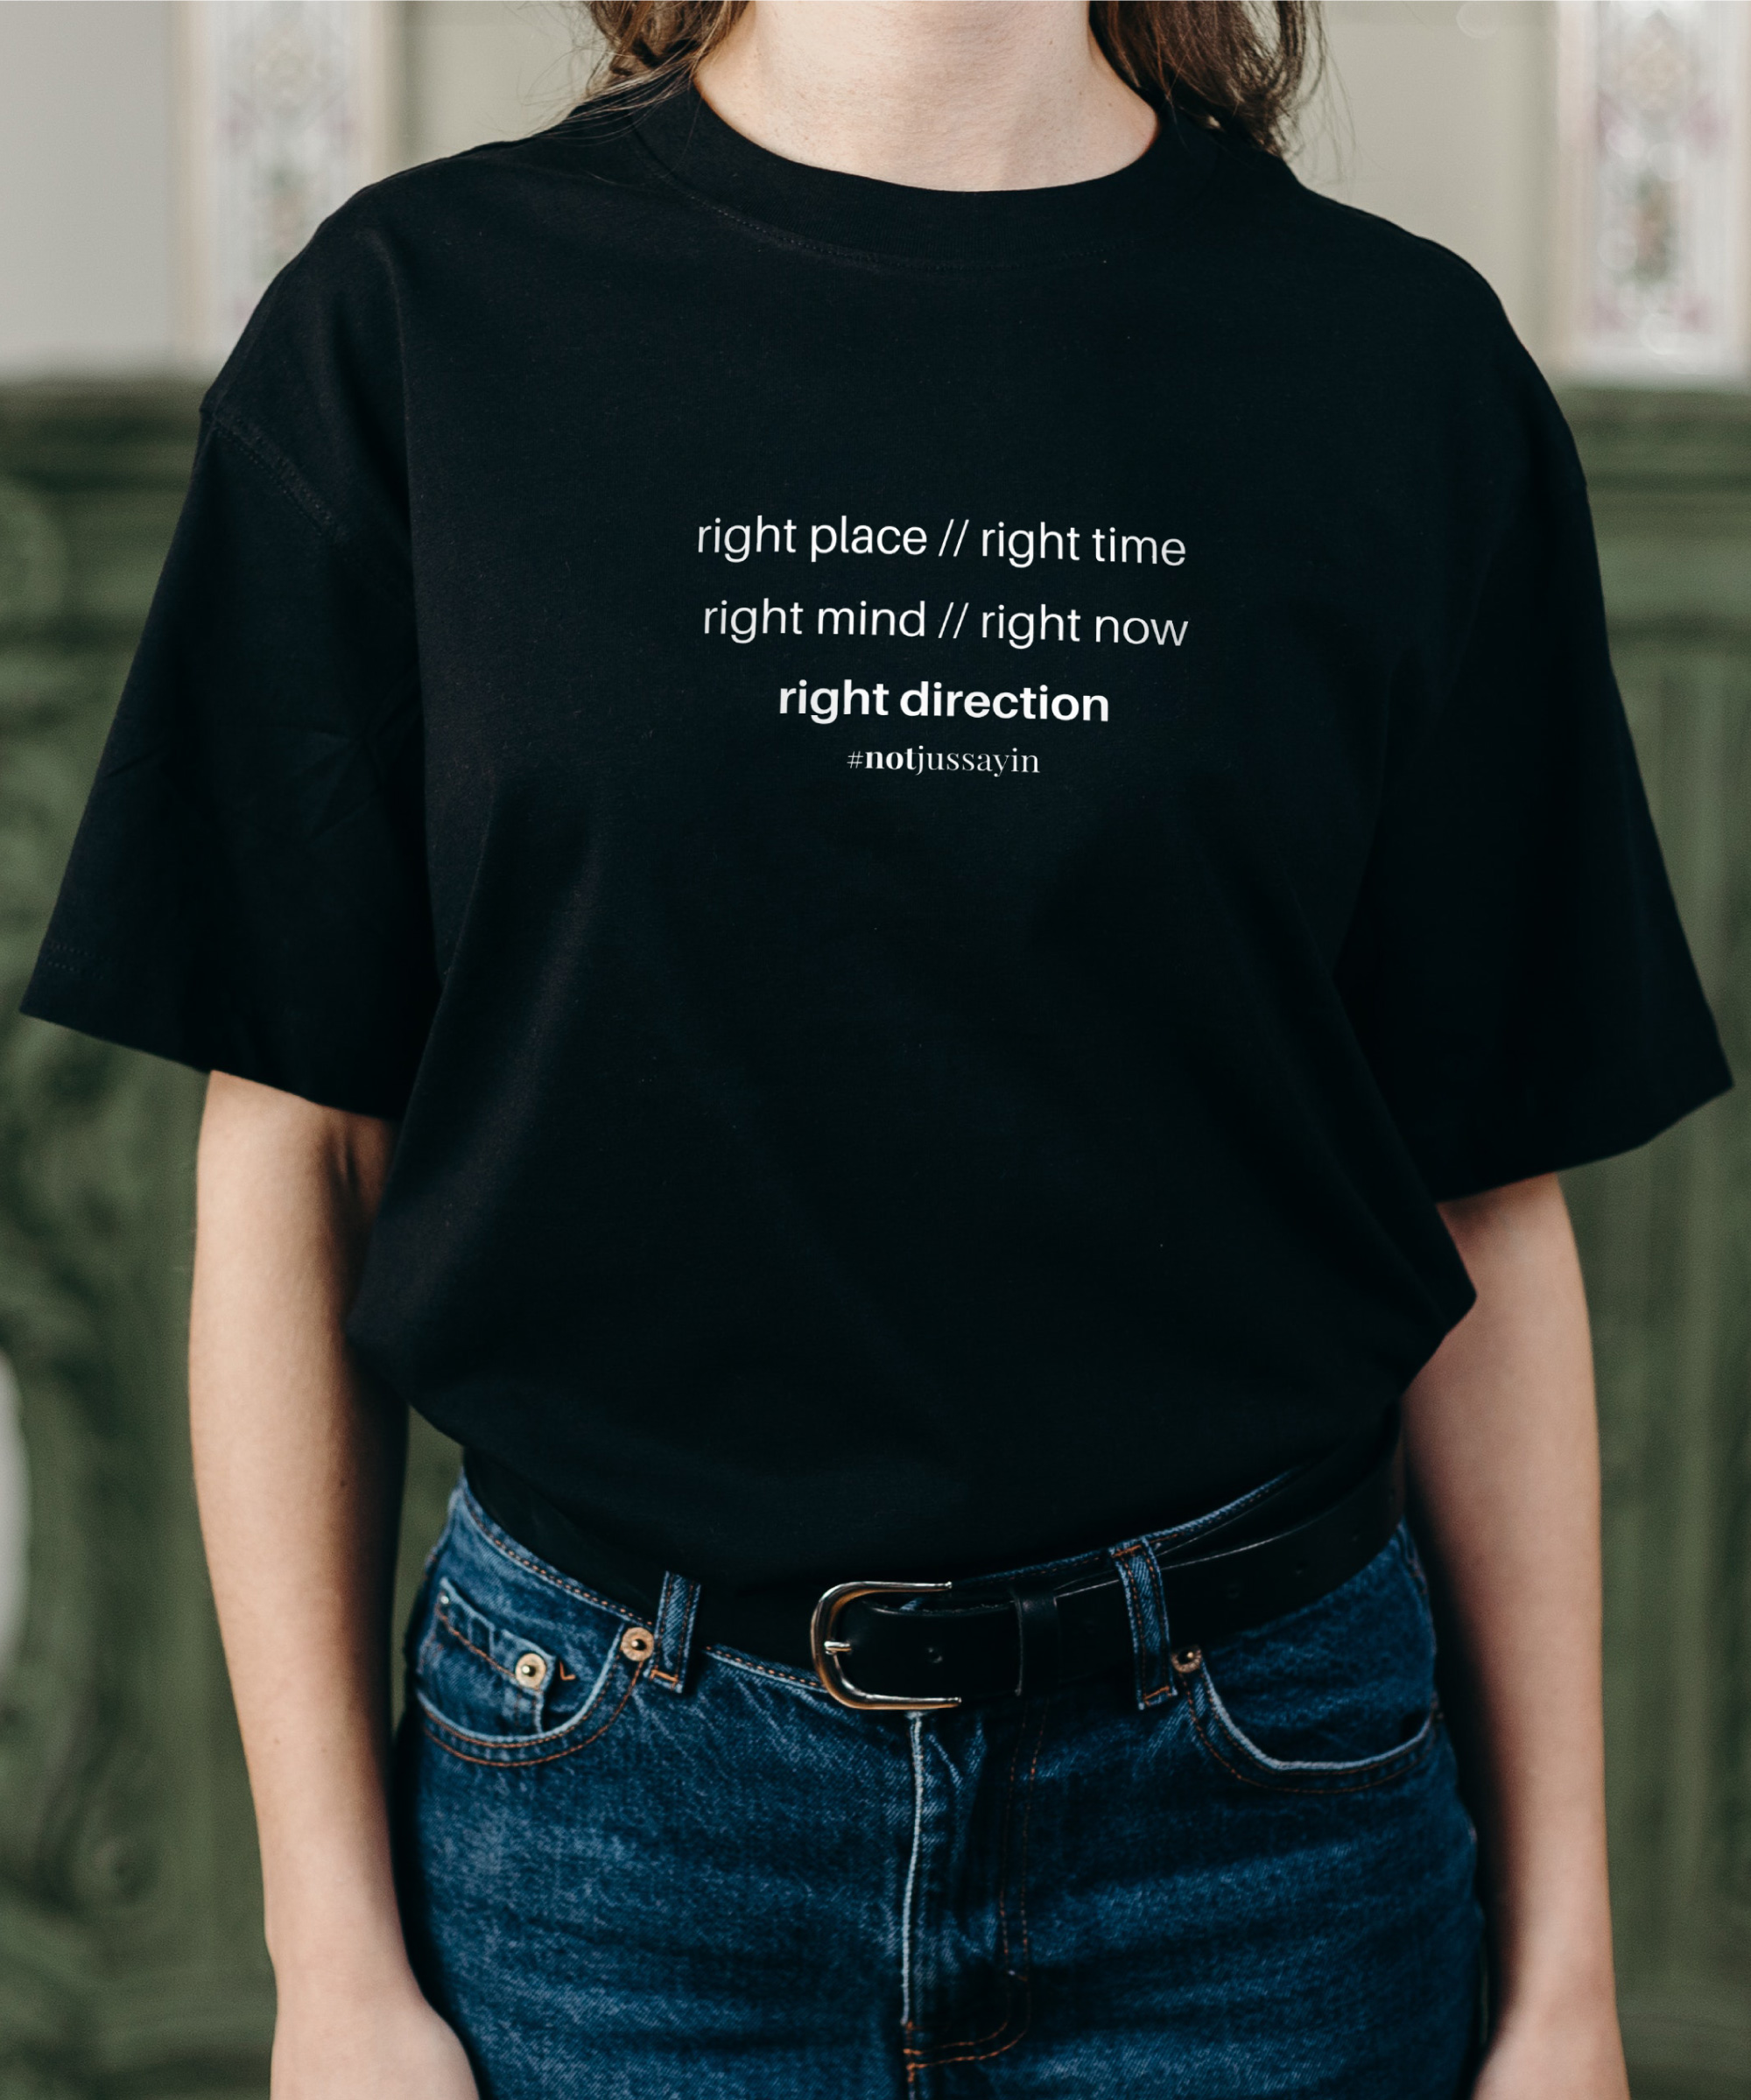 Right place right time right mind right now right direction quote t shirt